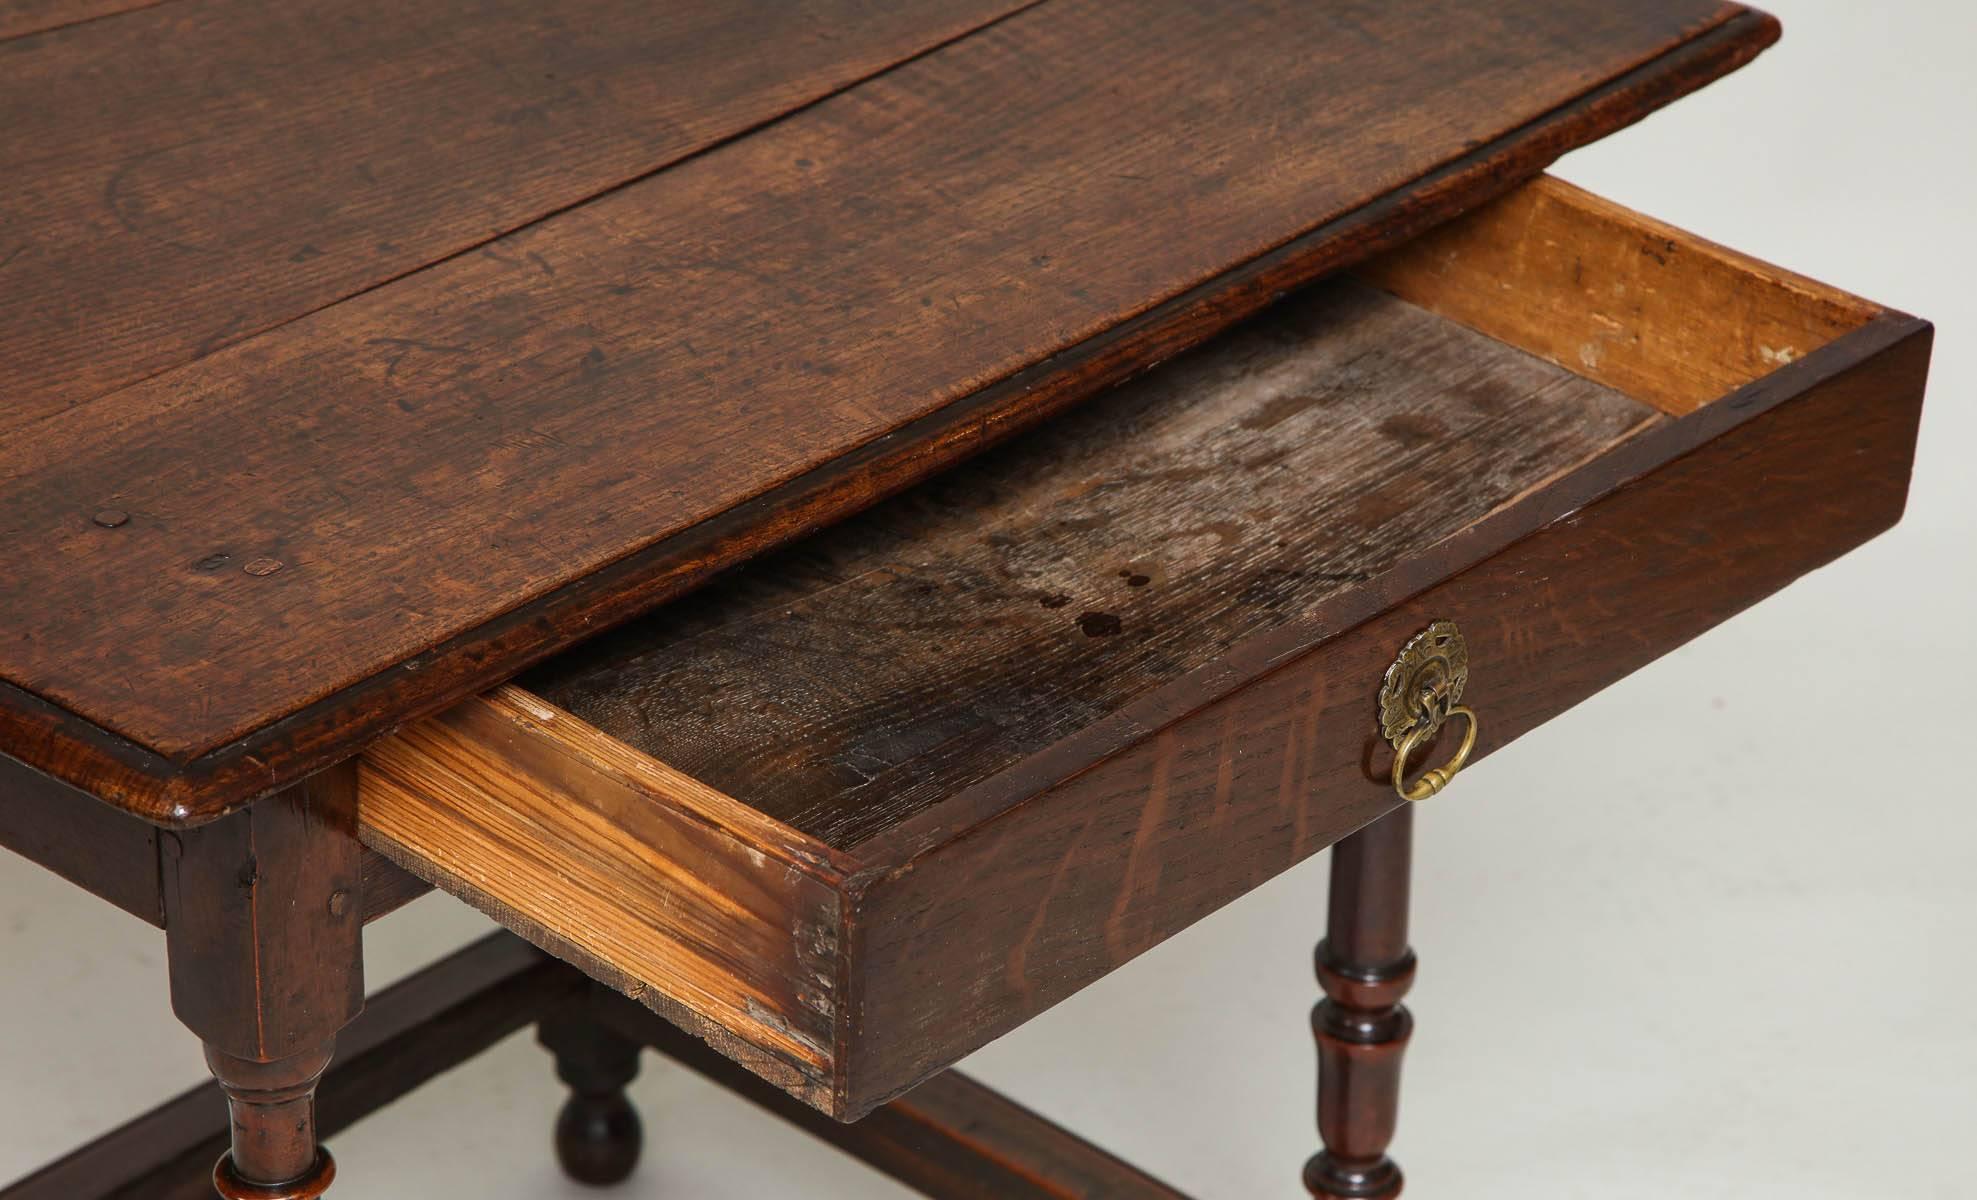 Early 18th Century English Oak and Fruitwood Stretcher Base Table